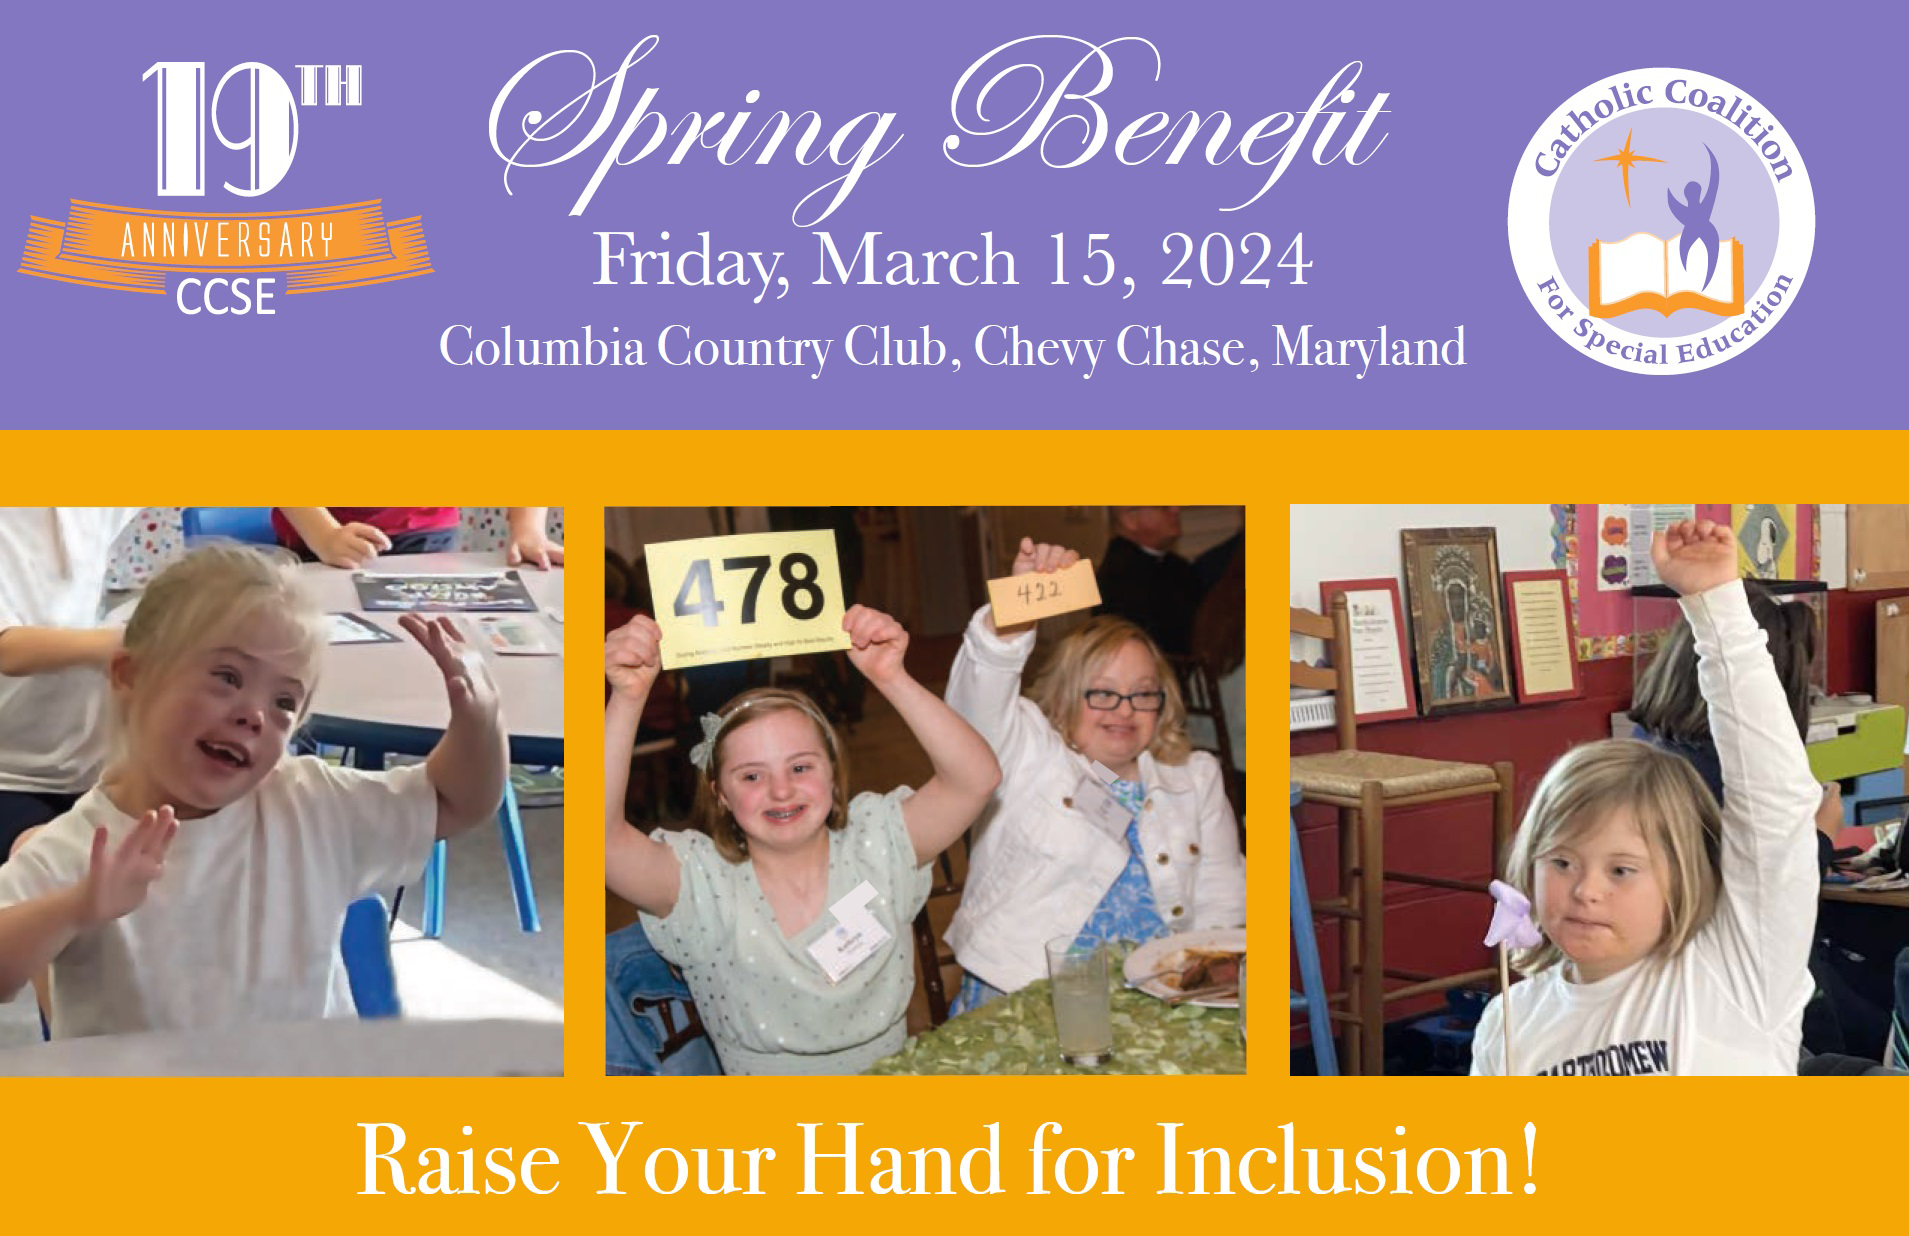 Raise Your Hand for Inclusion